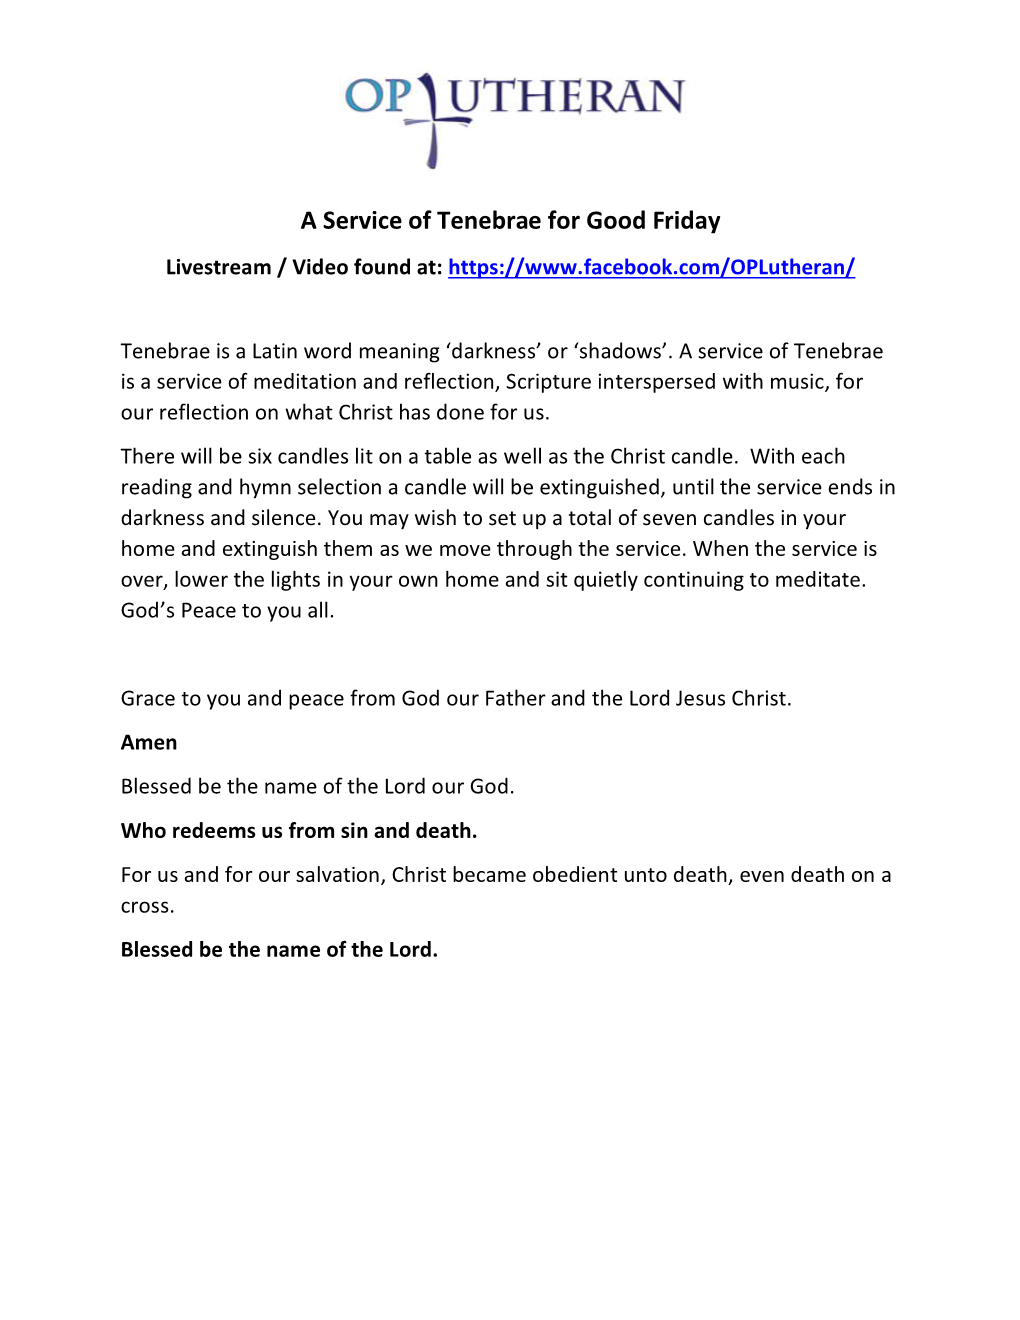 A Service of Tenebrae for Good Friday Livestream / Video Found At